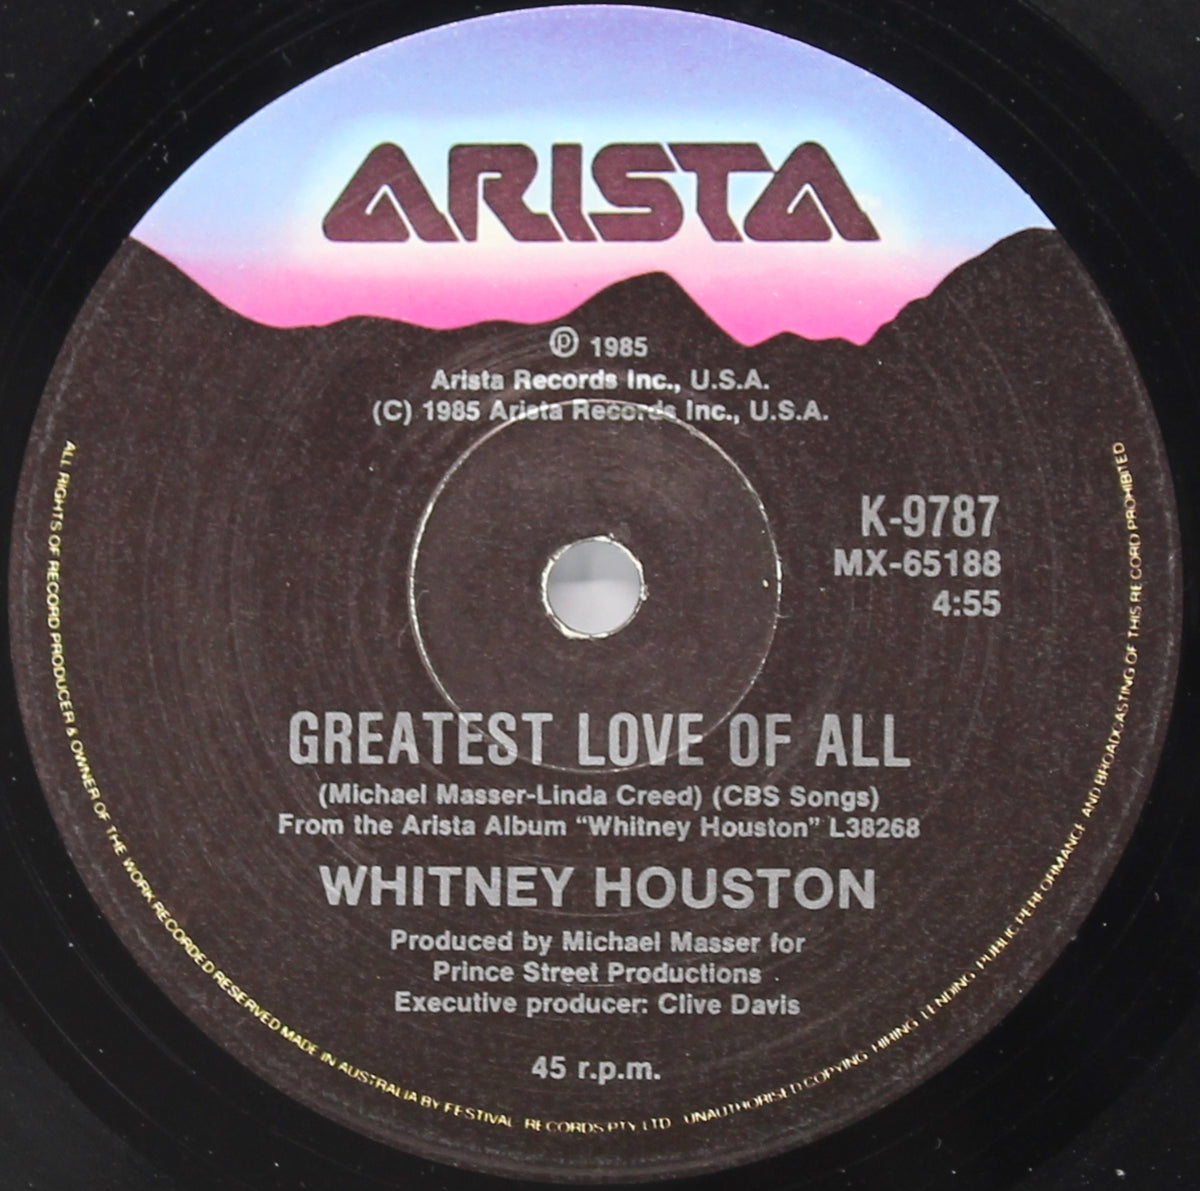 Whitney Houston ‎– You Give Good Love, Vinyl, 7&quot;, 45 RPM, Single, Limited Edition, Australia 1985